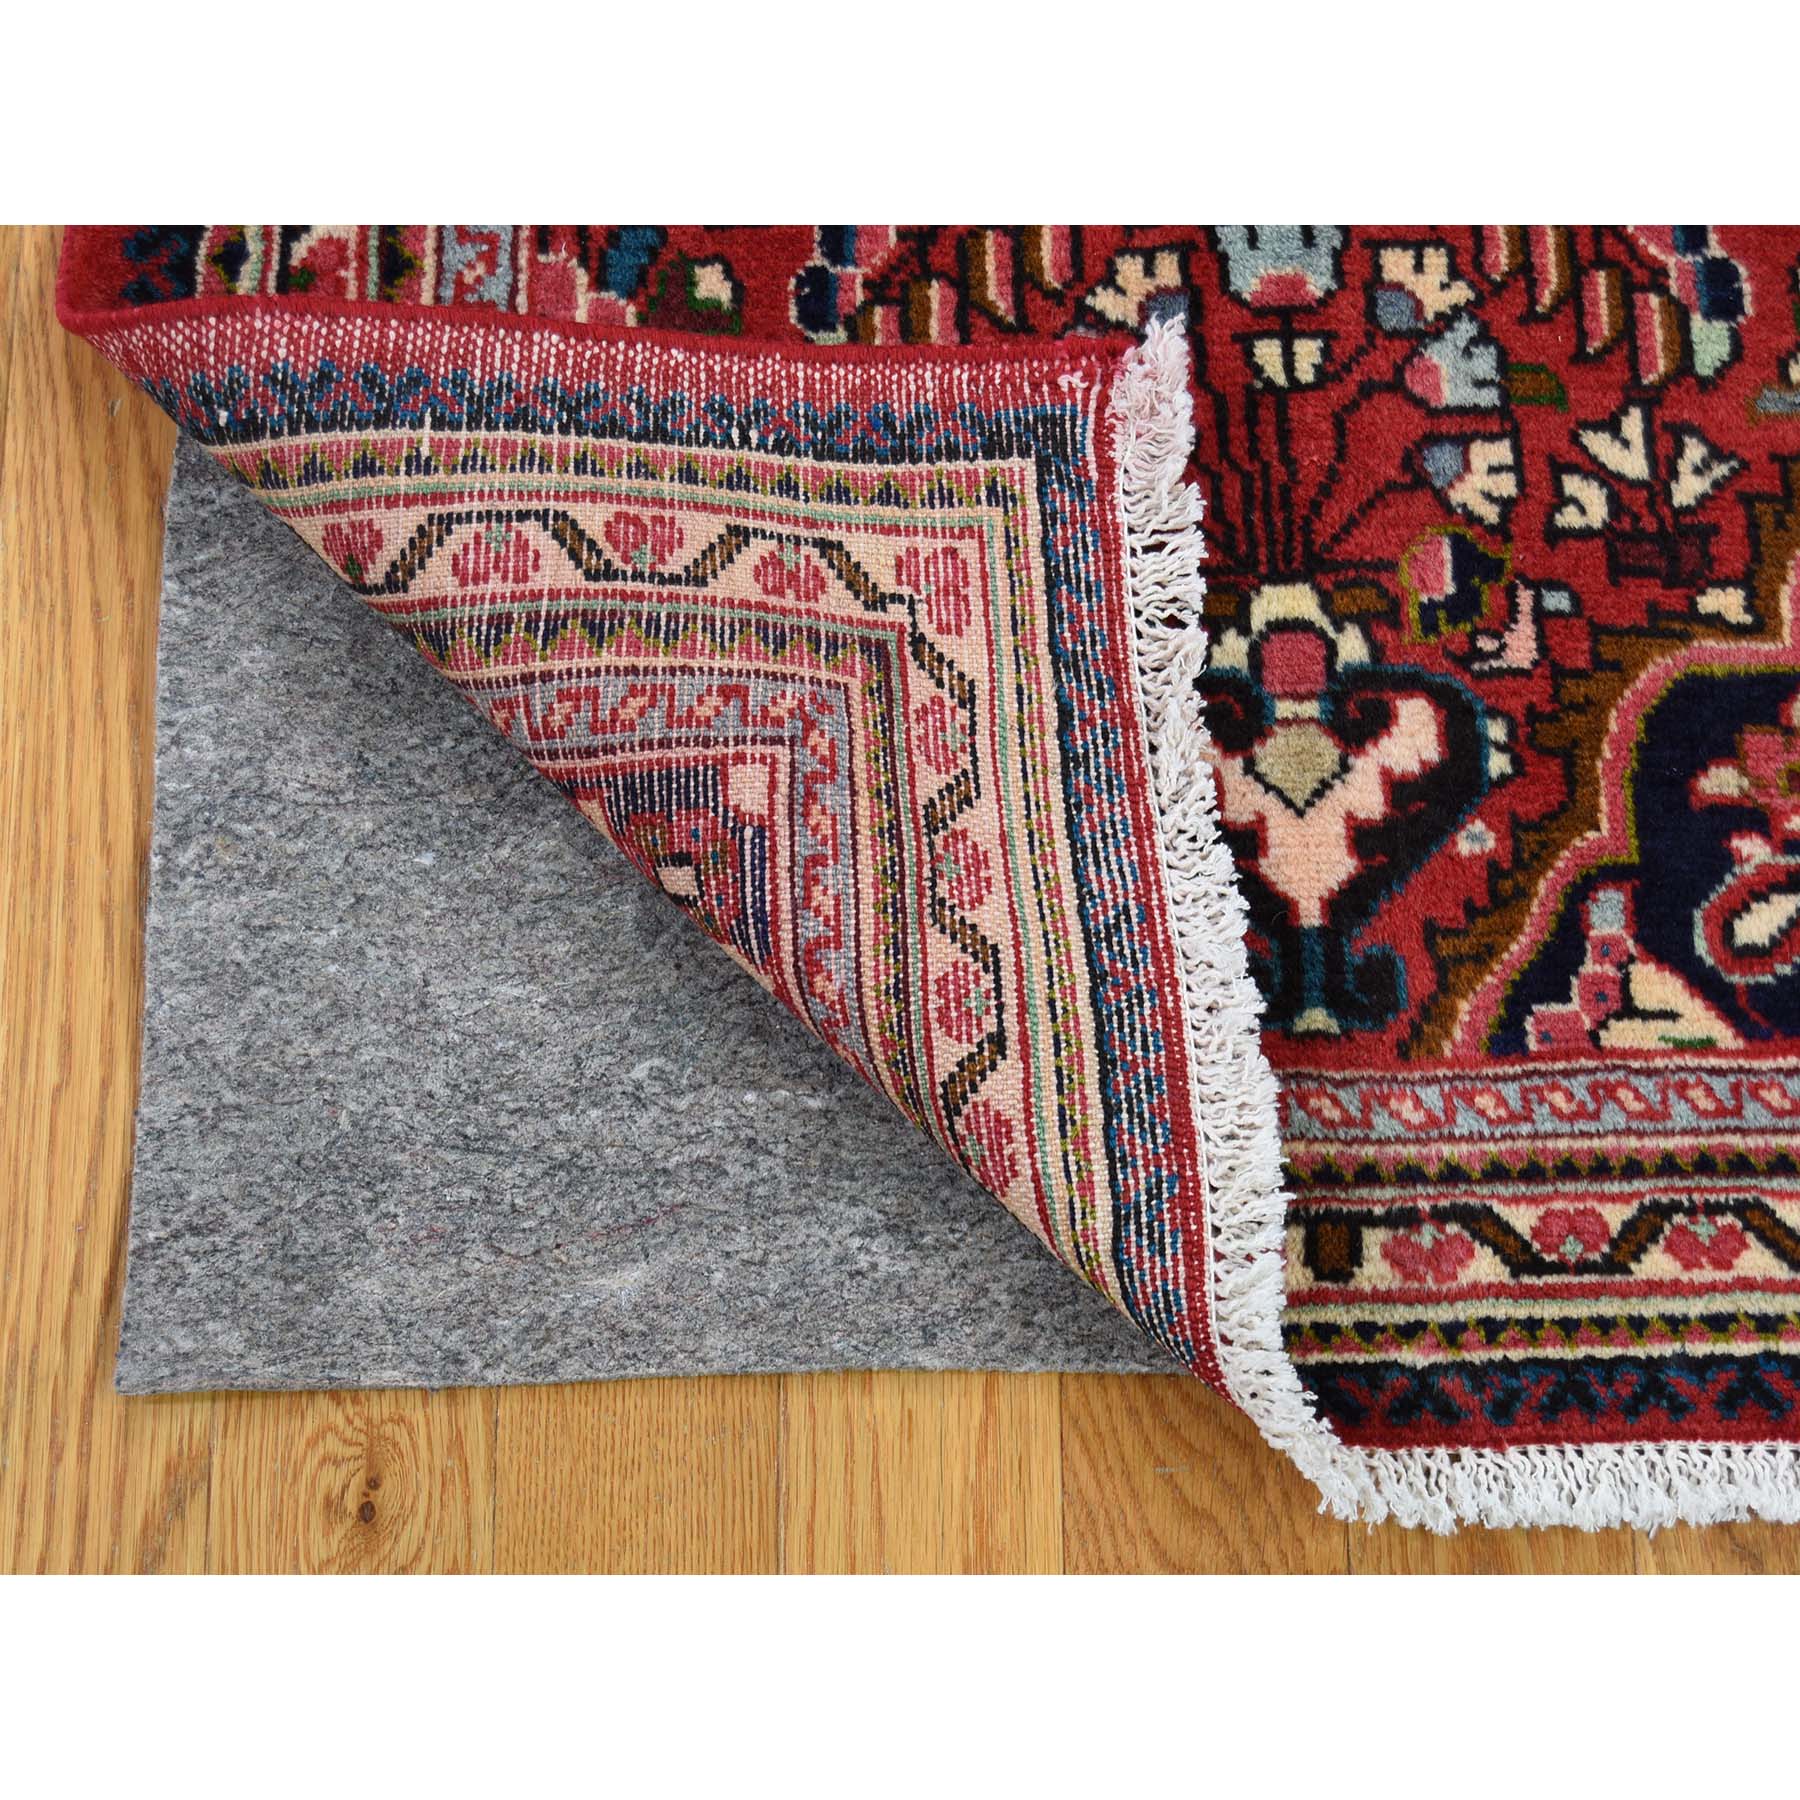 2-6 x4-6  New Persian Lilahan Pure Wool Hand-Knotted Oriental Rug 